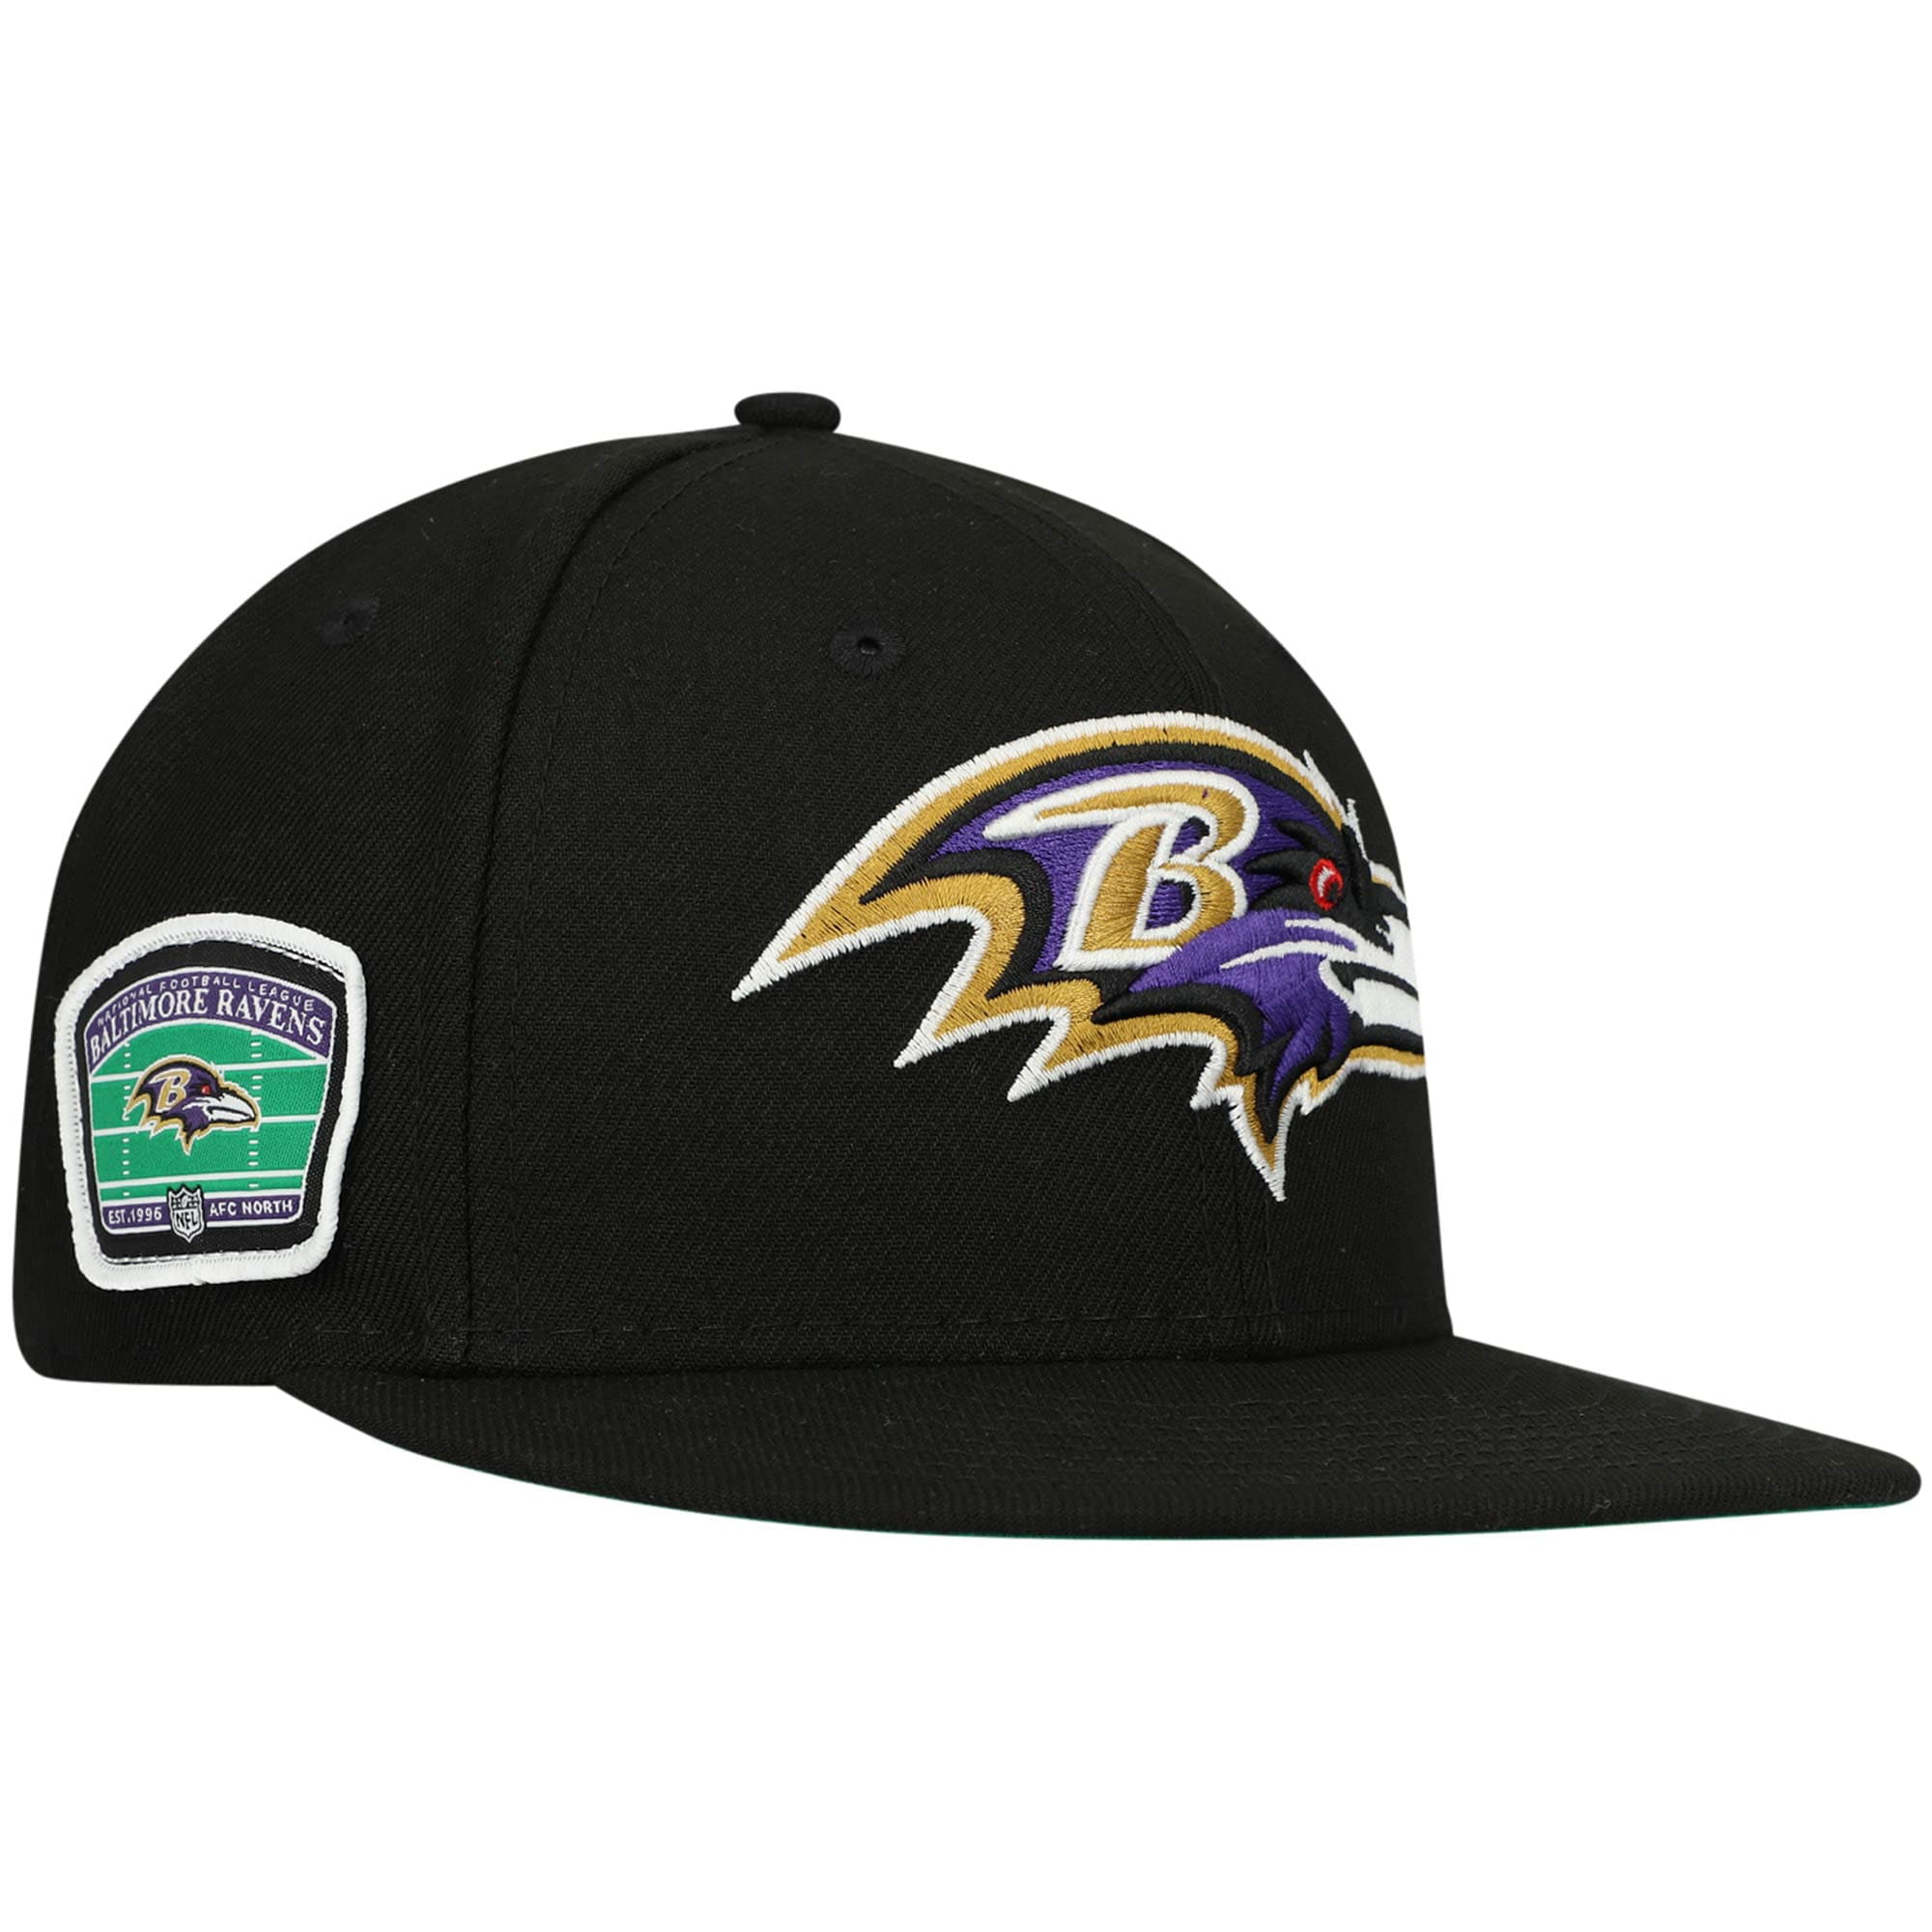 BALTIMORE RAVENS VINTAGE EMBROIDERED IRON ON PATCH  3" x 3" 